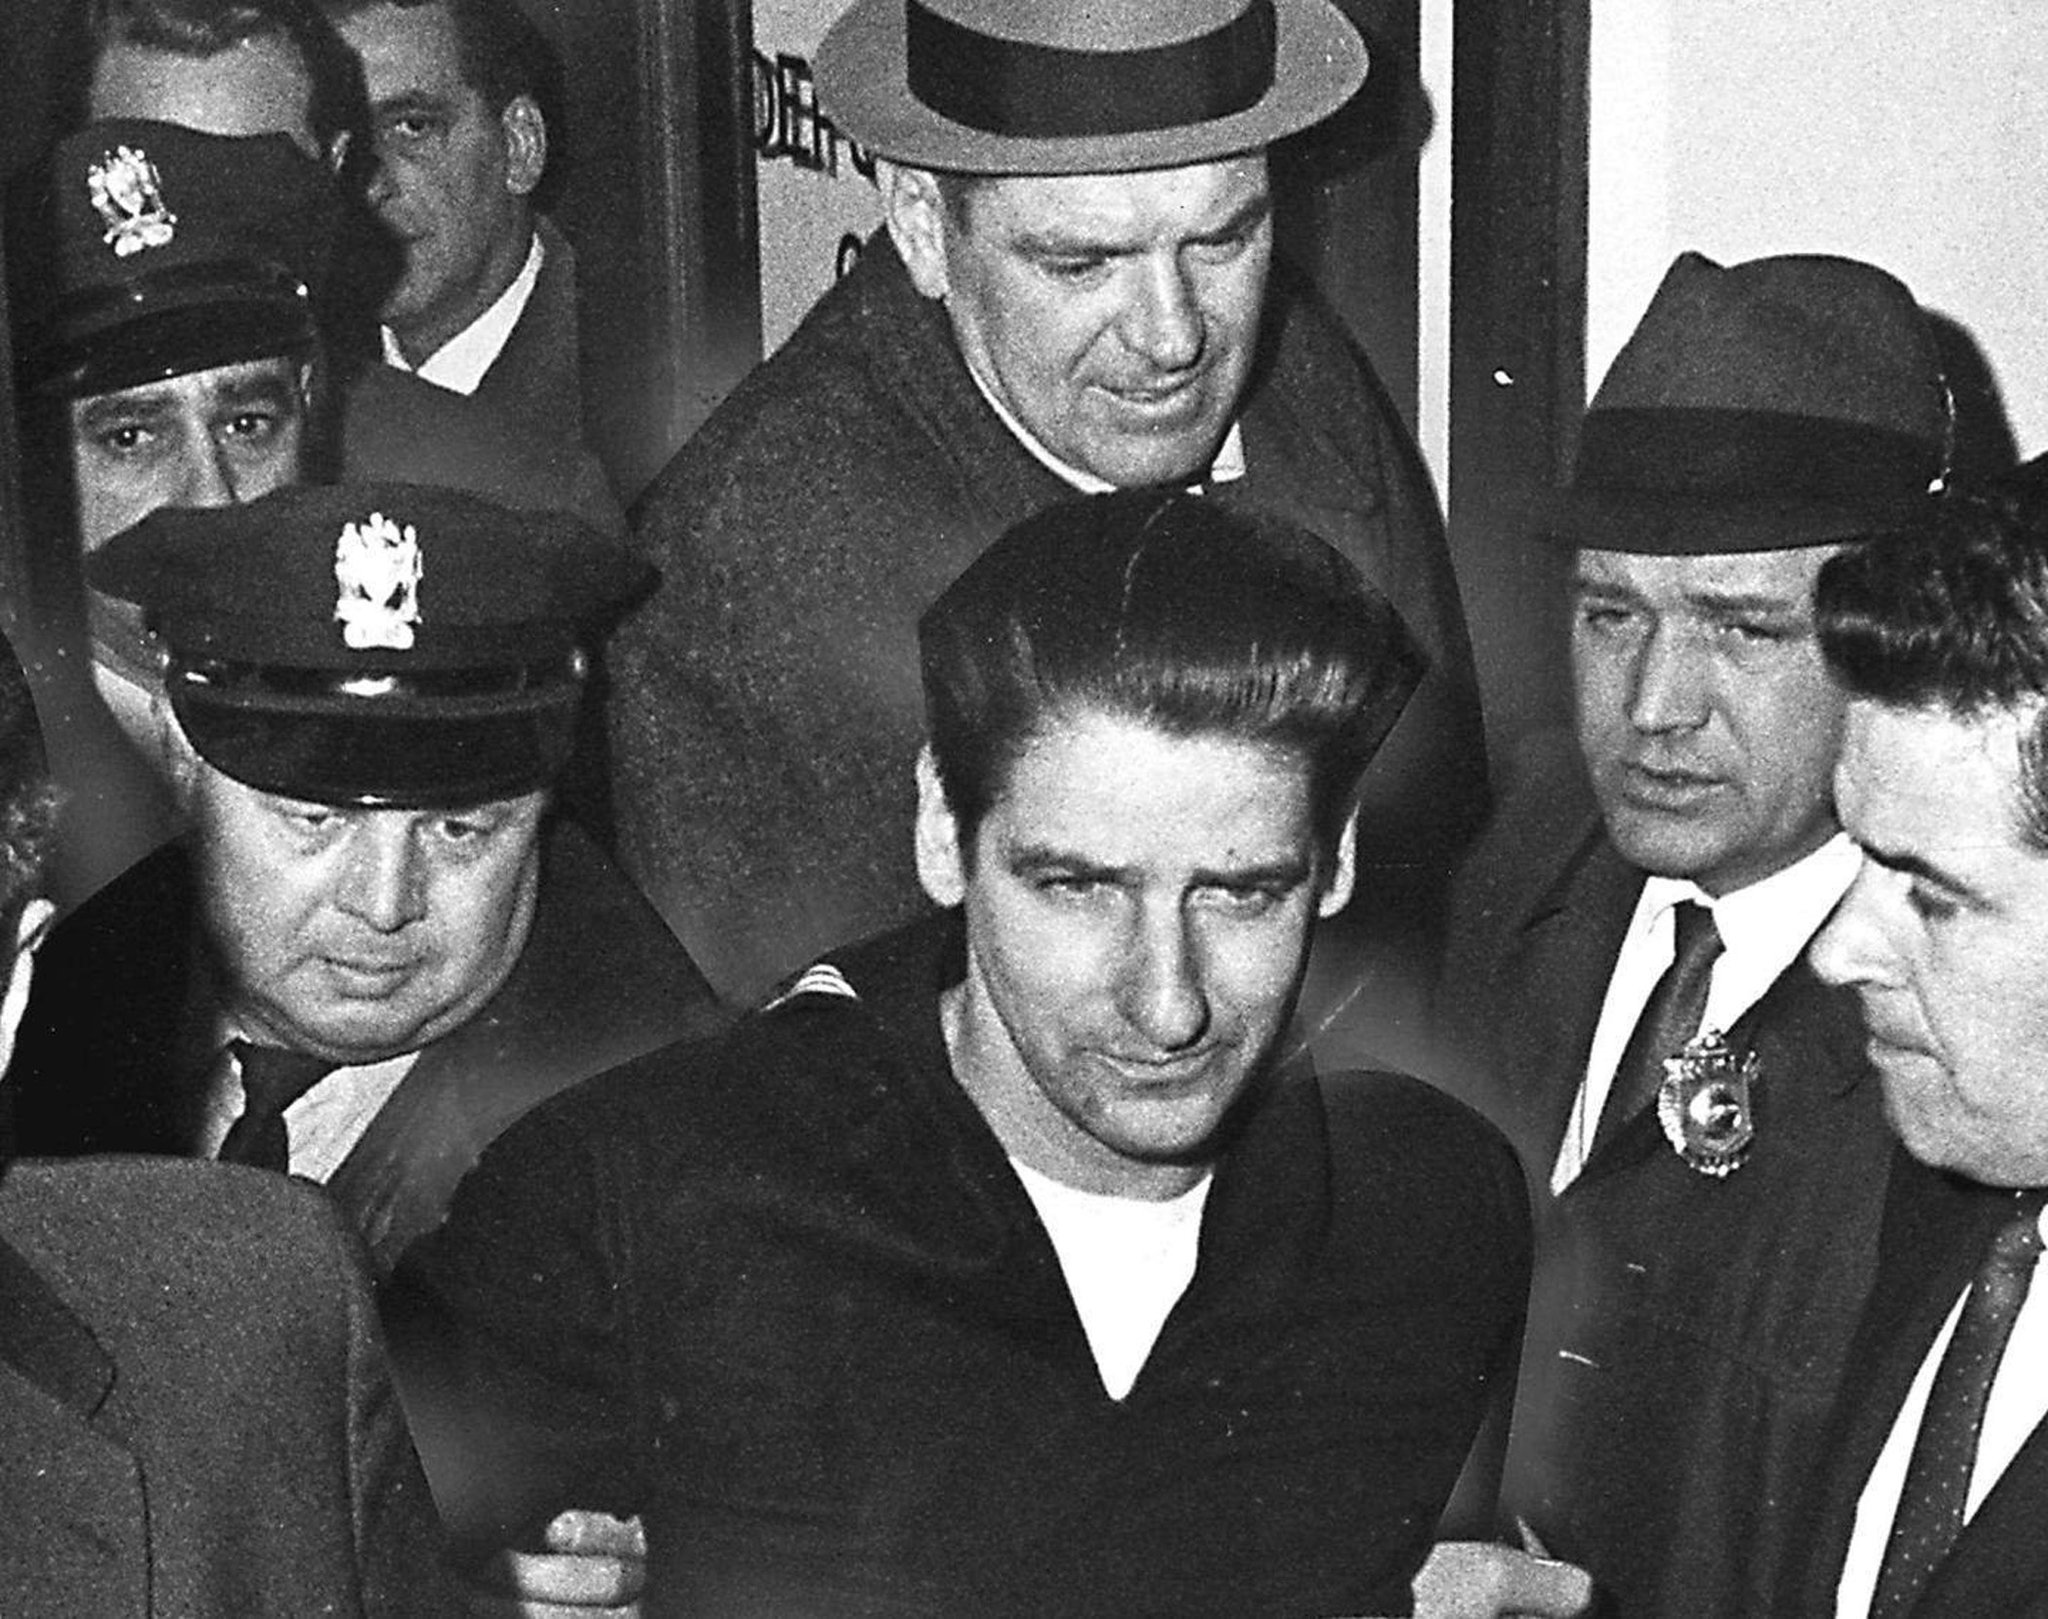 Could An Abusive Childhood Have Caused Albert DeSalvo To Become The 'Boston Strangler' Serial Killer?